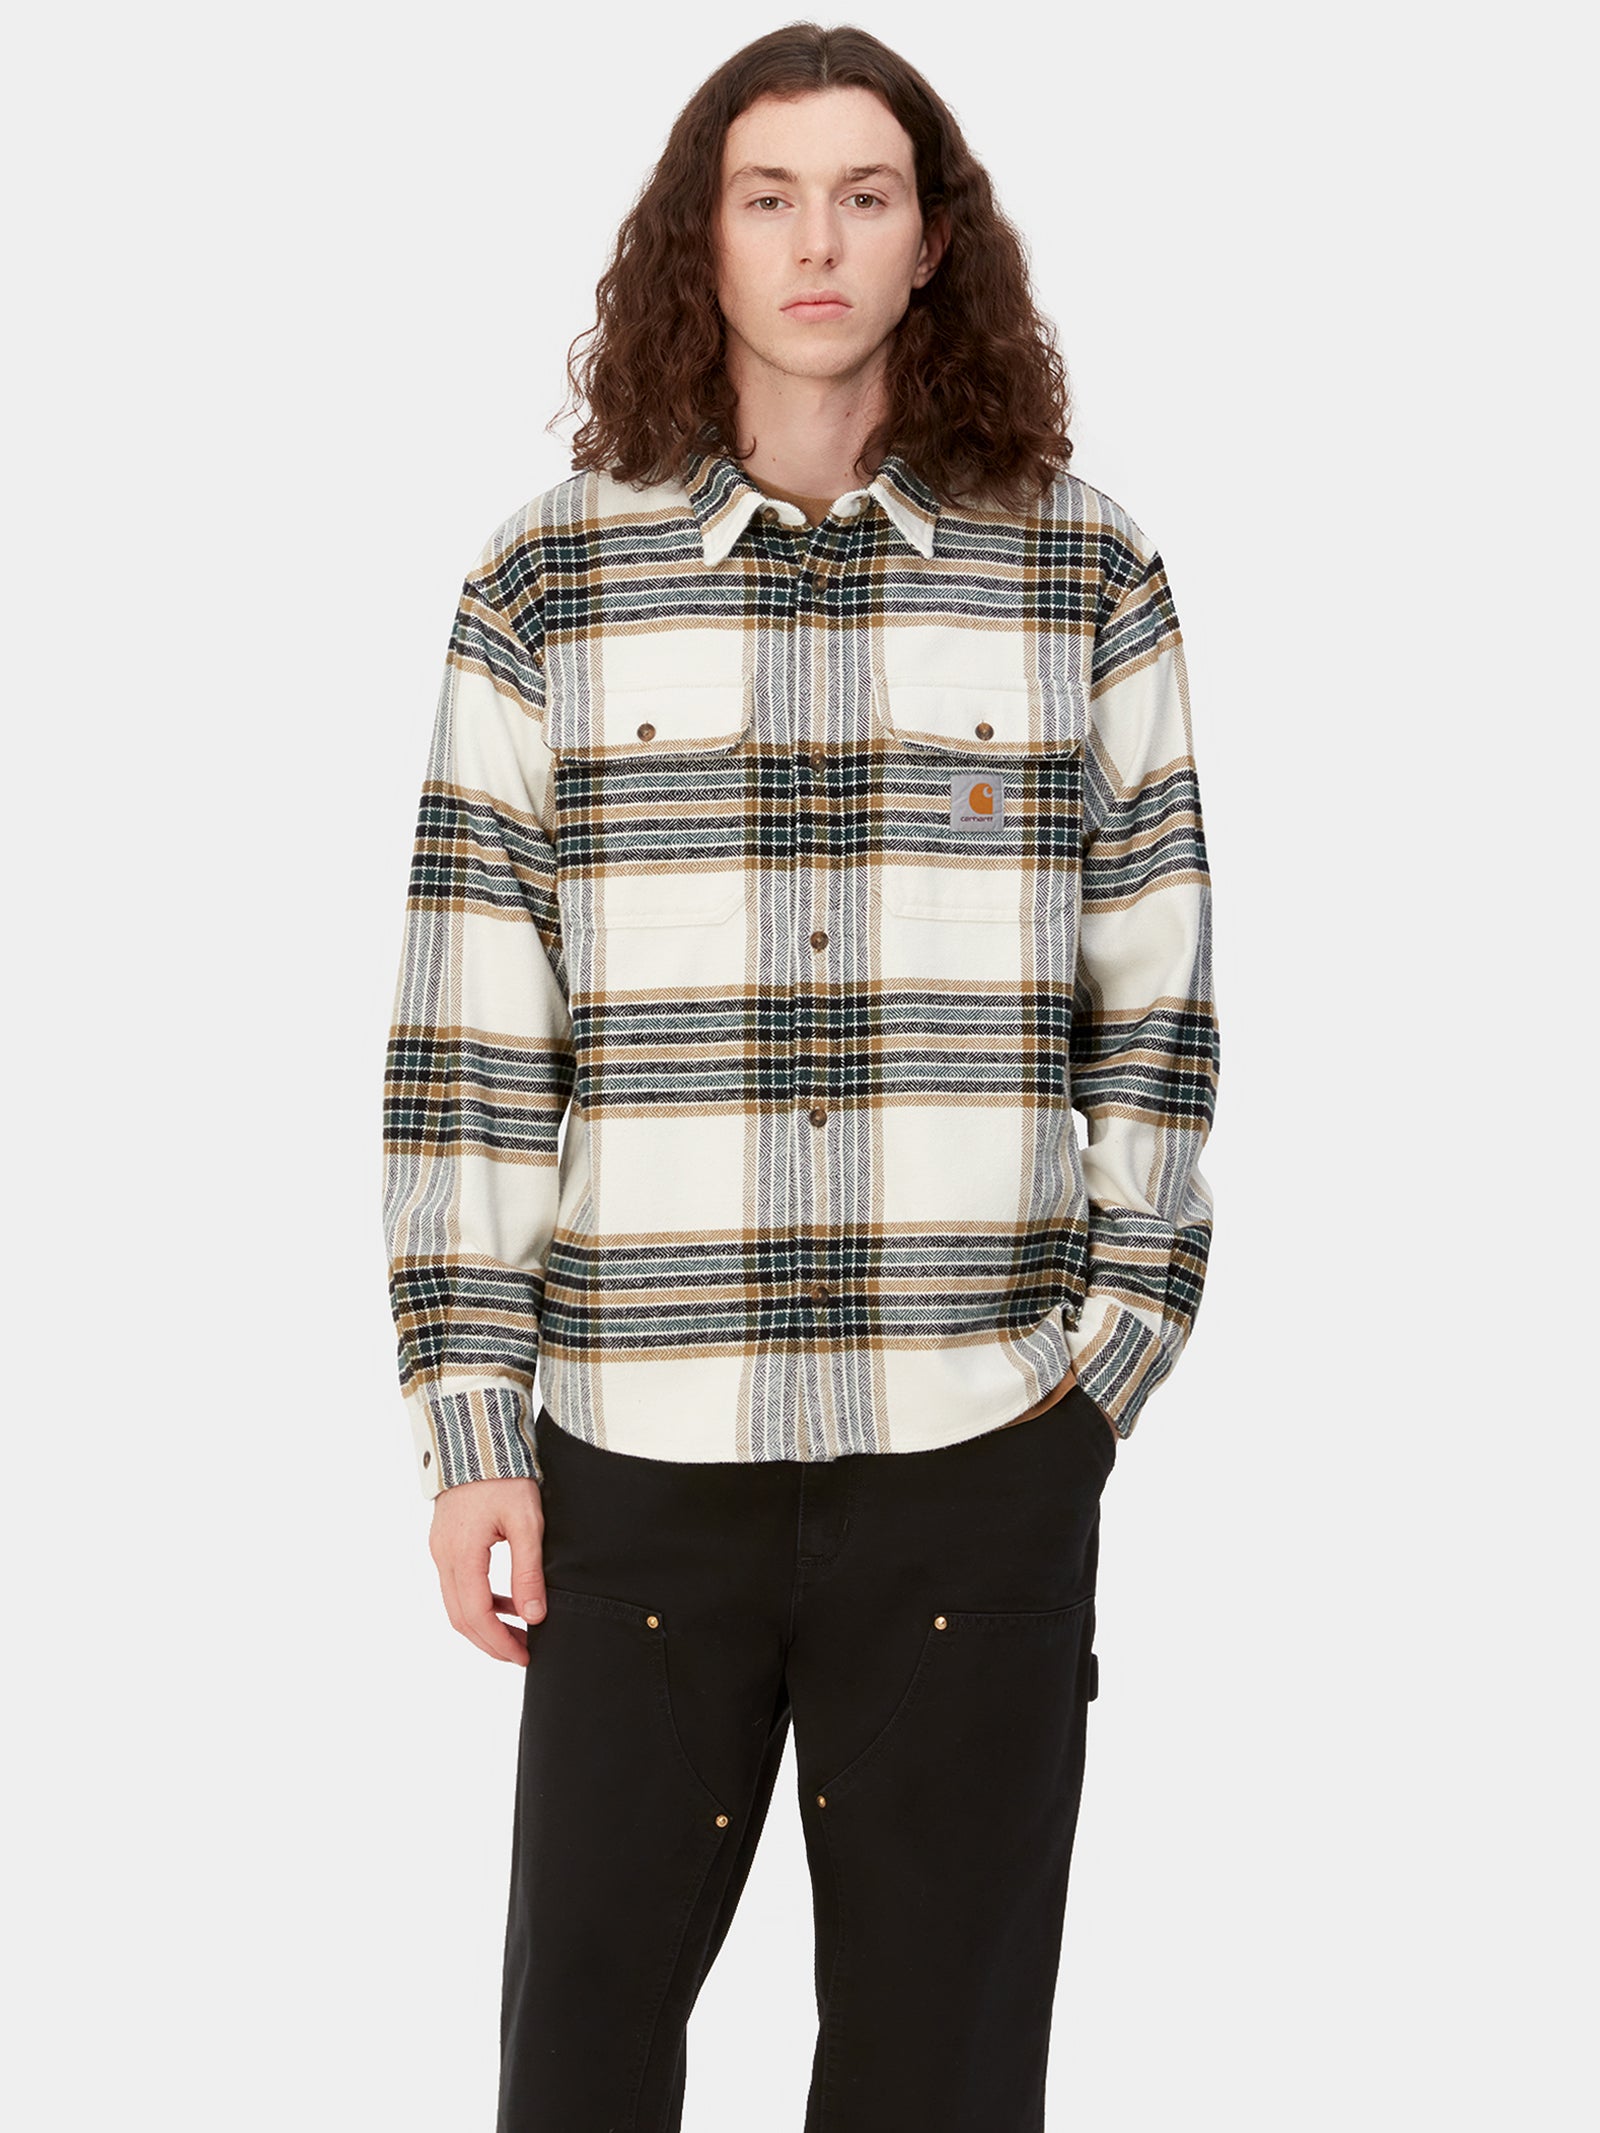 Long Sleeve Hawkins Check Shirt in Larch & Wax White